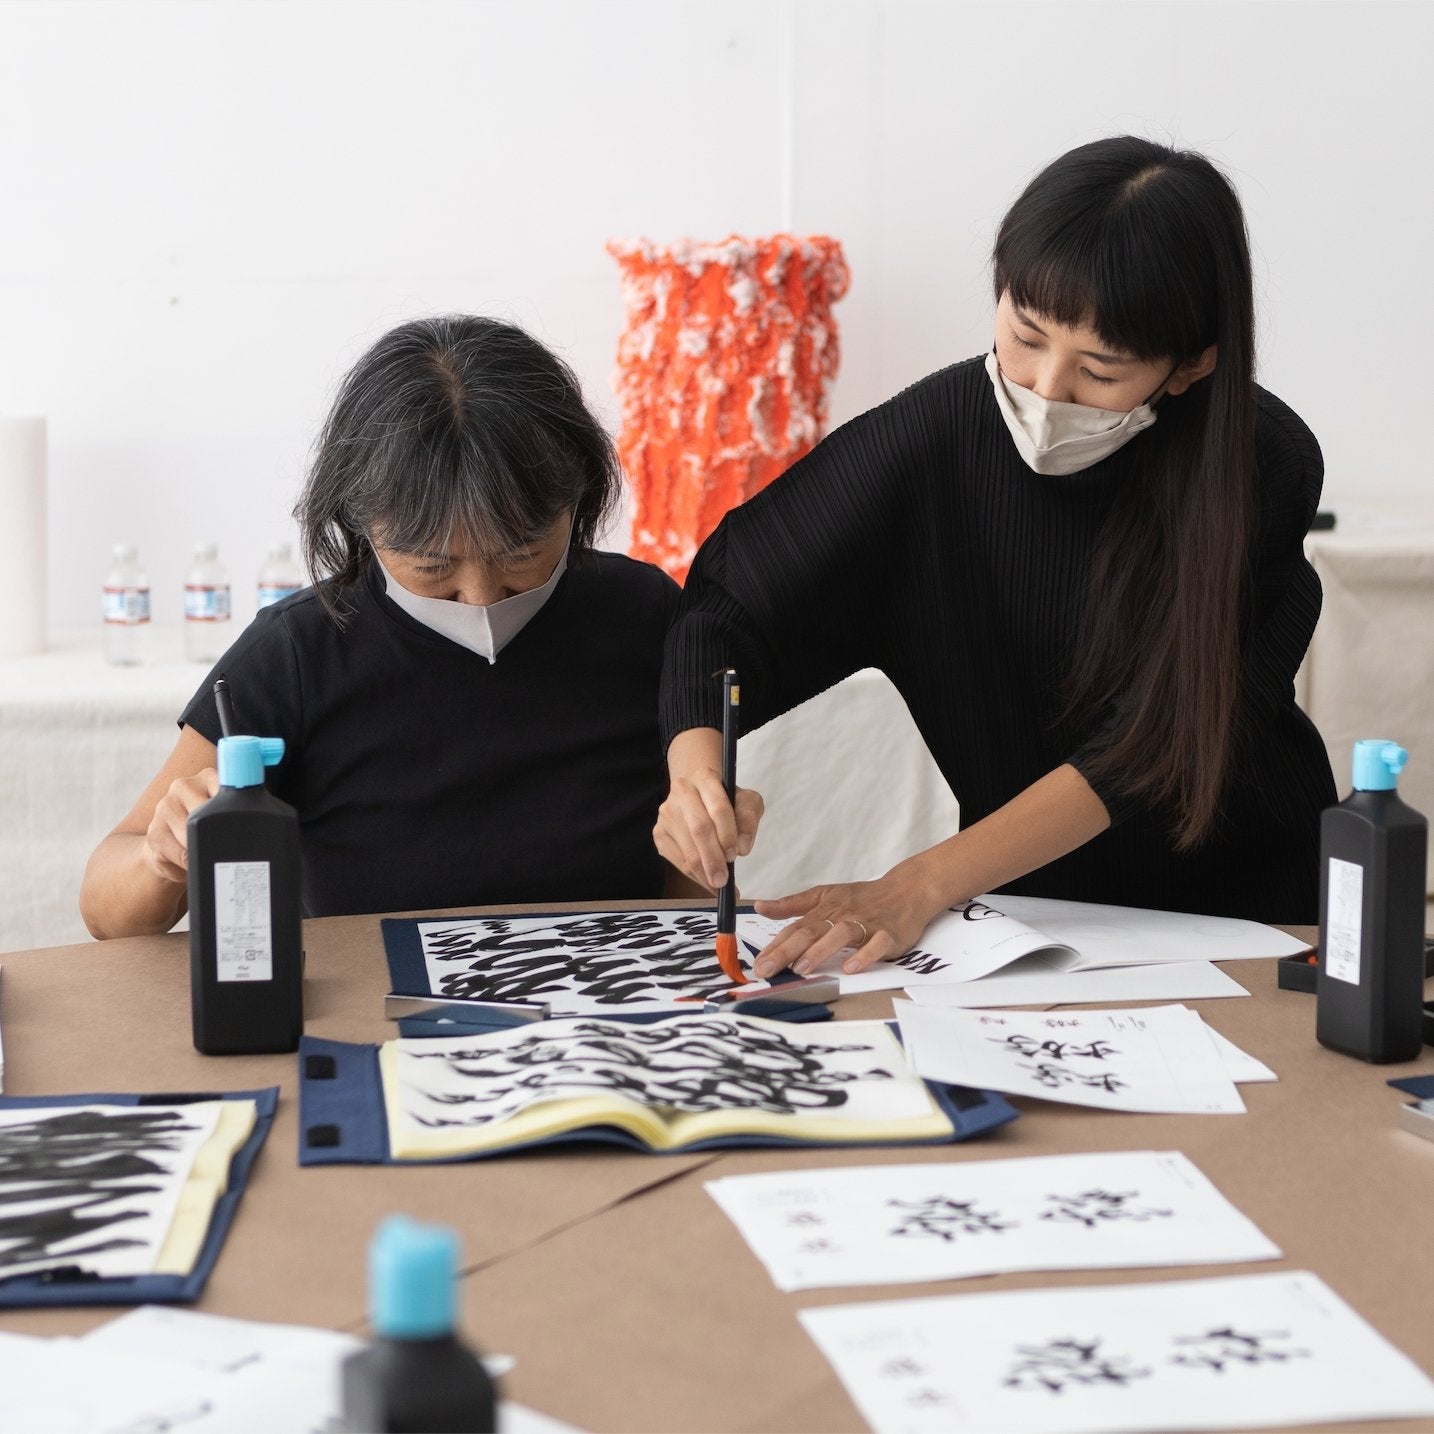 SEASONS 04 Workshops with Aoi Yamaguchi - April 29th & April 30th, 2023 | Tortoise General Store